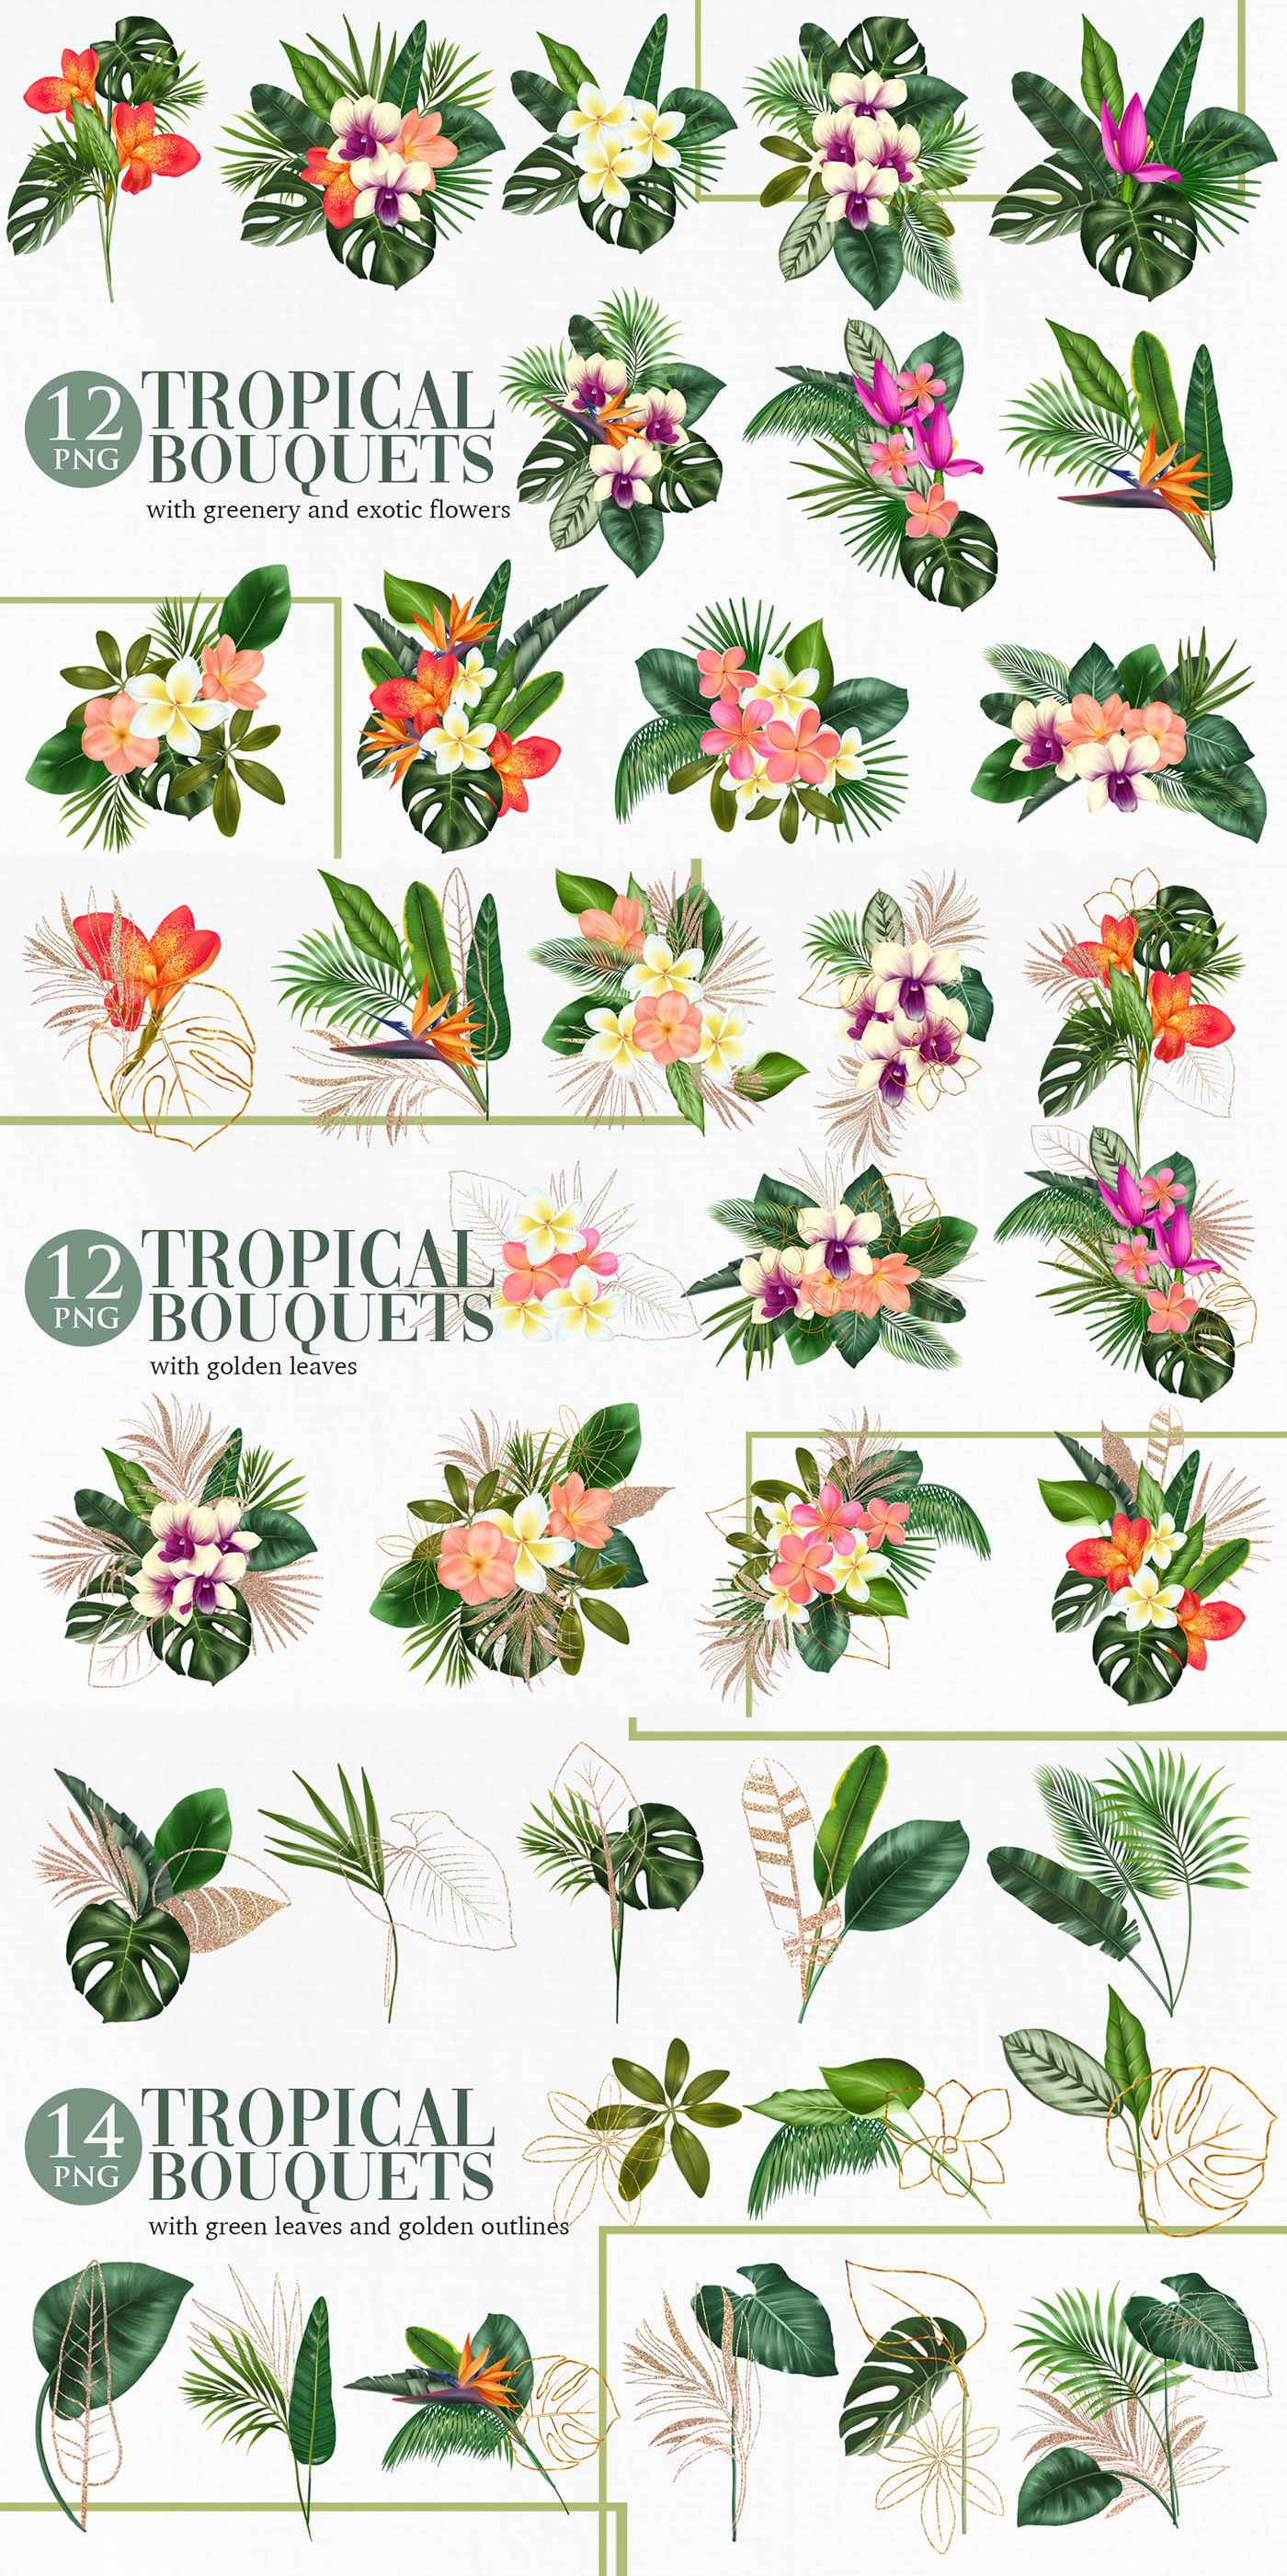 graphic ILLUSTRATION  painting   clipart Flowers botanical floral tropical flowers greenery jungle